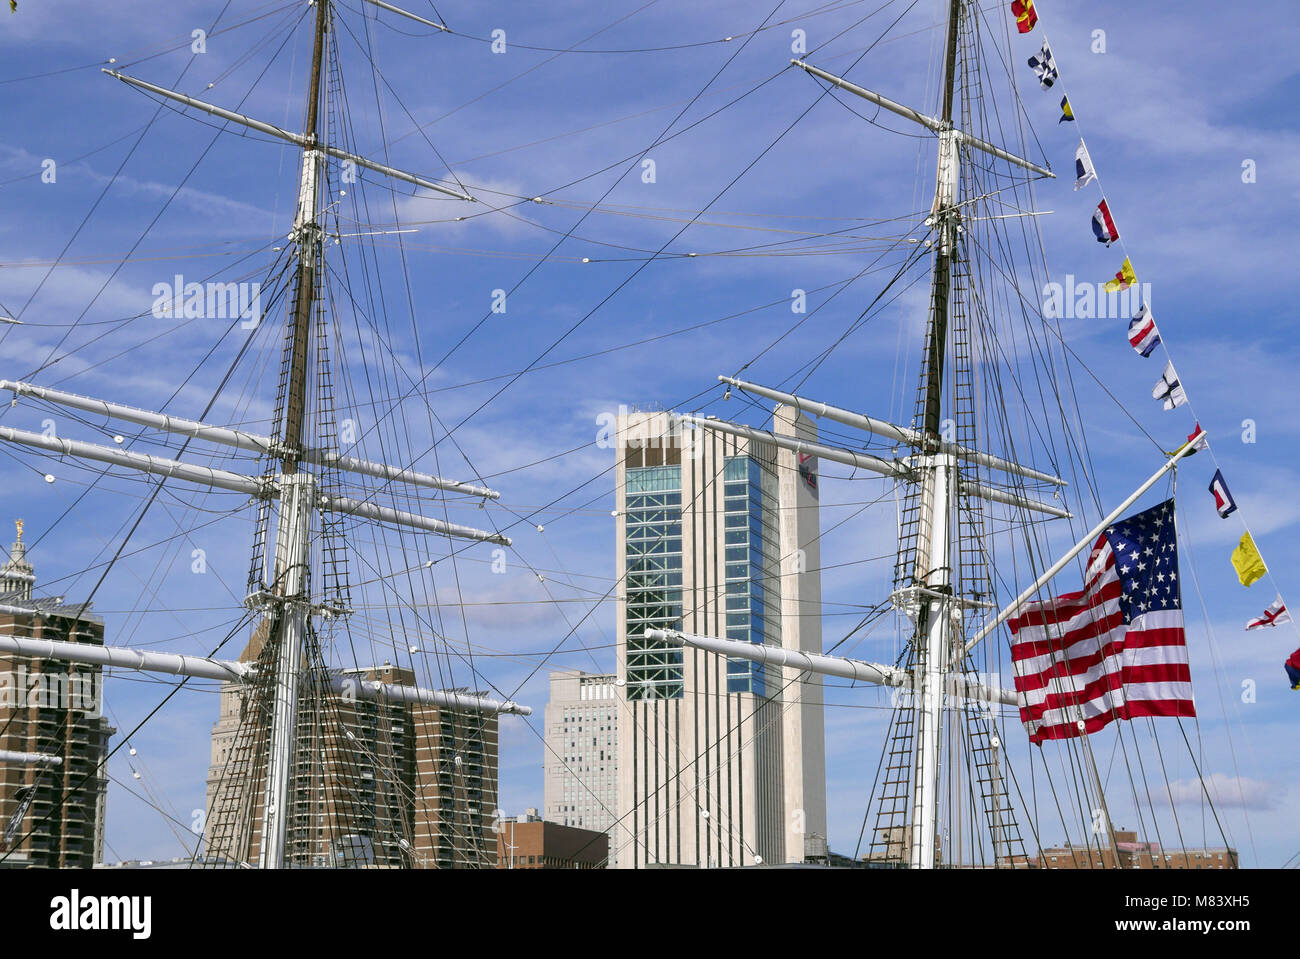 Masts of the ships at the South Street Seaport in Manhattan New York USA Stock Photo